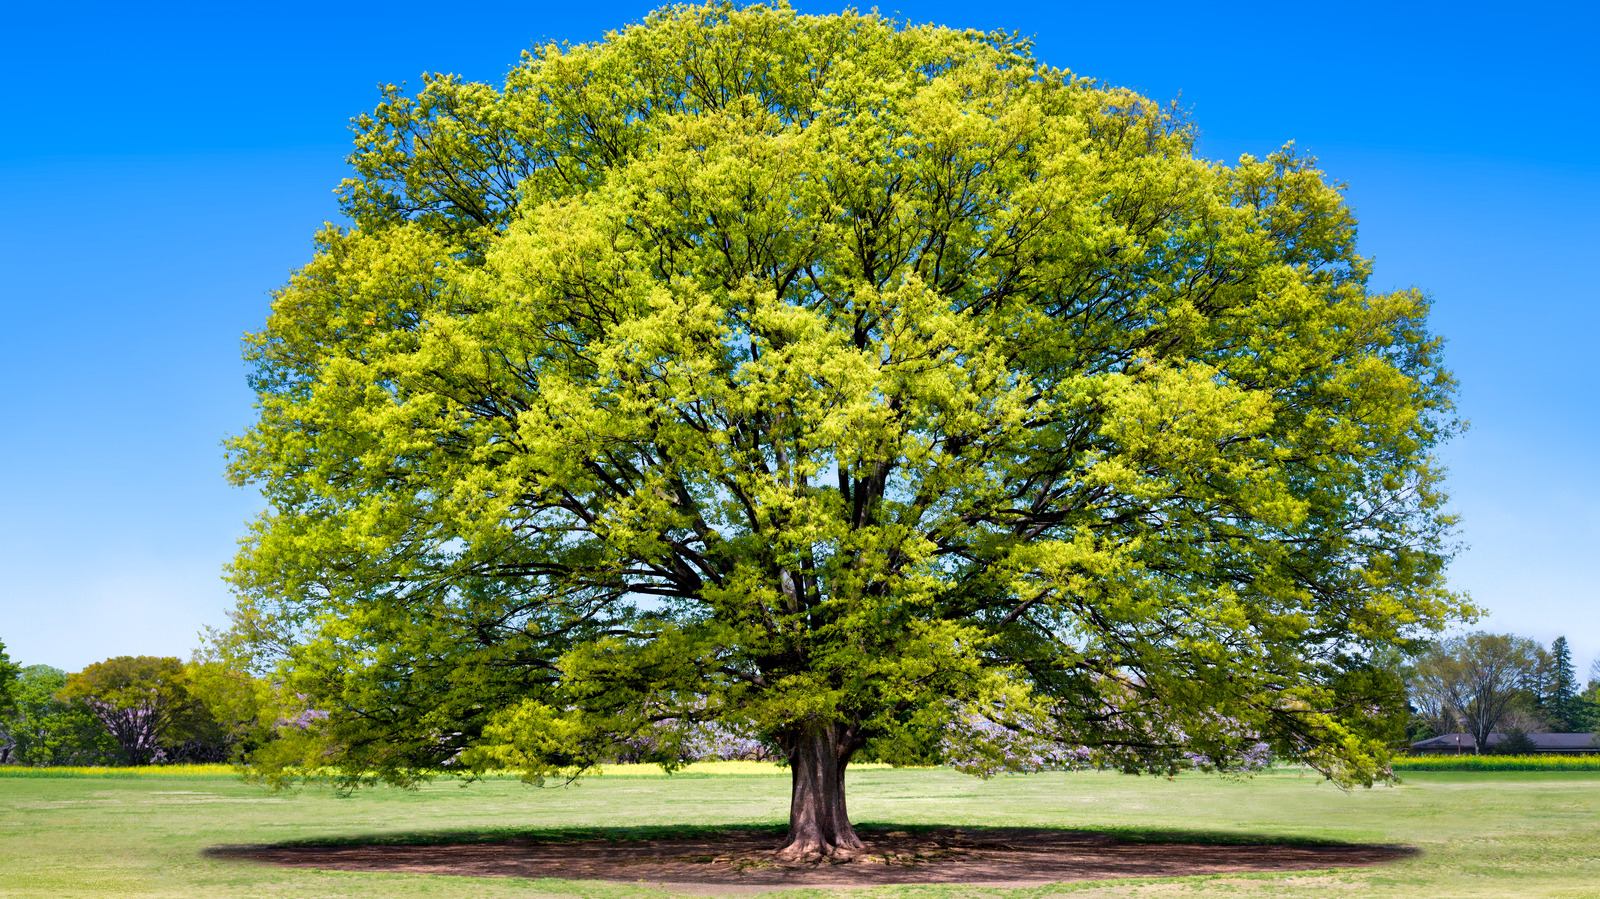 https://www.housedigest.com/img/gallery/mistakes-everyone-makes-when-caring-for-japanese-elm-trees/l-intro-1704266601.jpg